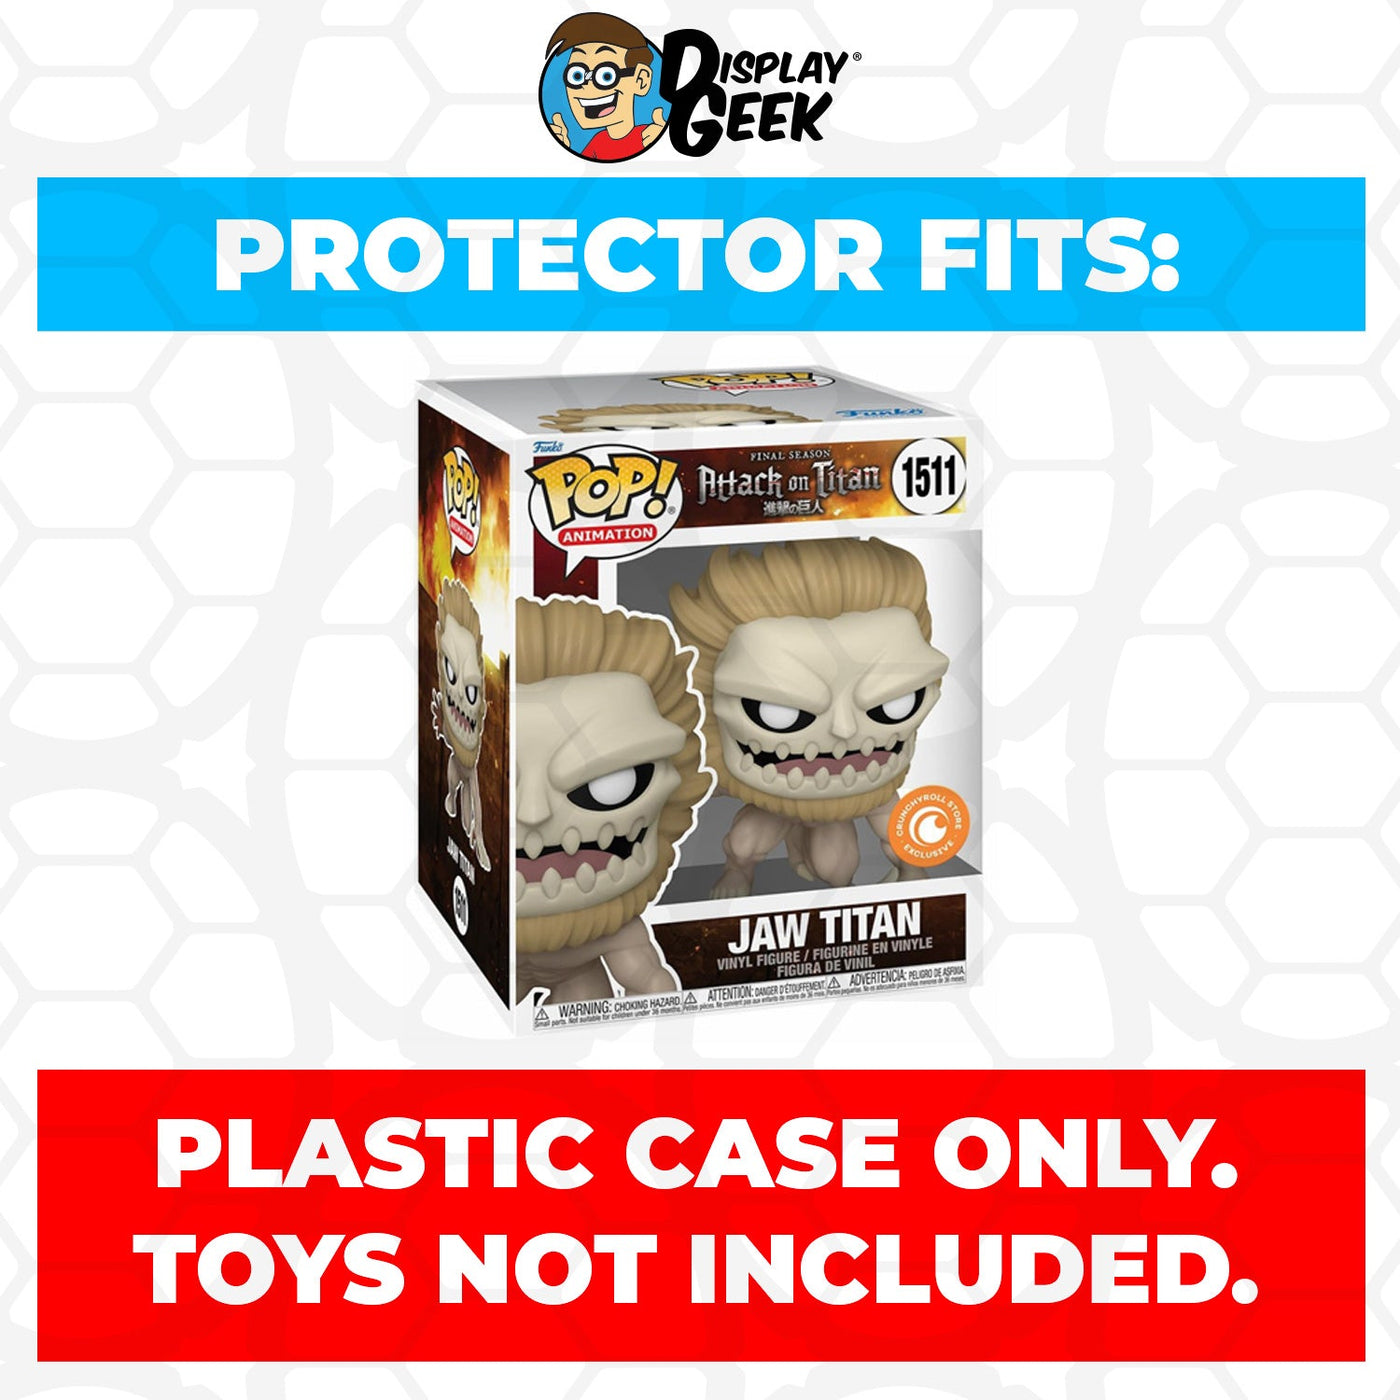 Funko POP! 6 inch Attack on Titan - Jaw Titan #1511 Super Size Pop Protector CONFIRMED by Display Geek